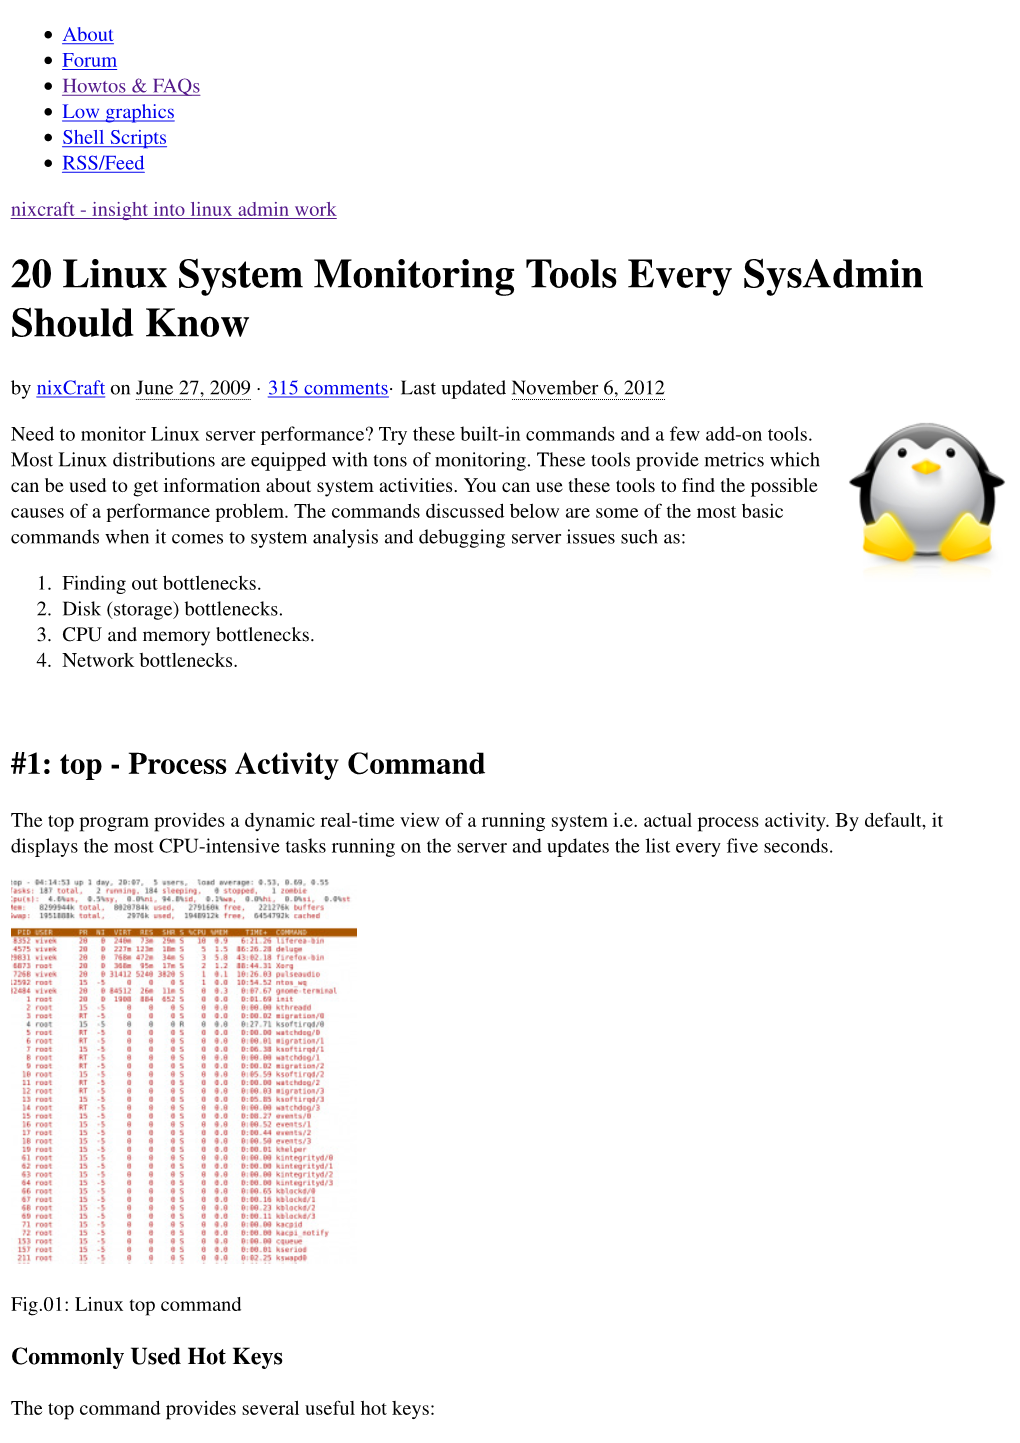 20 Linux System Monitoring Tools Every Sysadmin Should Know by Nixcraft on June 27, 2009 · 315 Comments · Last Updated November 6, 2012